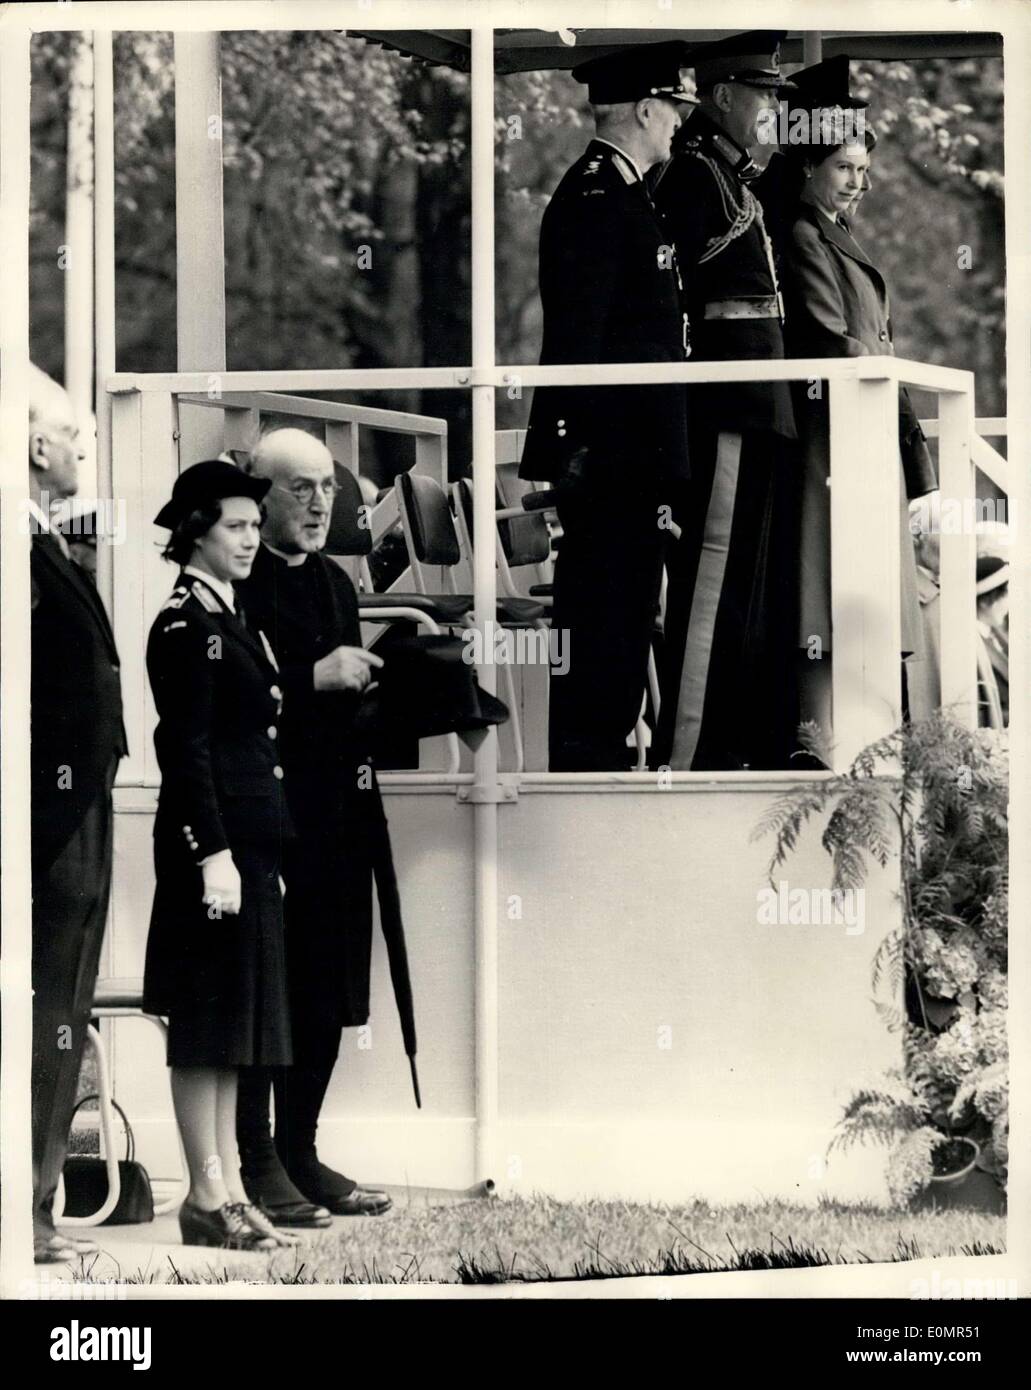 May 12, 1956 - Queen reviews St. John Ambulance Brigade takes the Salute: H.M. the Queen this afternoon reviewed the St. John Ambulance Brigade - at the Annual Hyde park Parade. Princess Margaret attended. Photo Shows H.M. The Queen takes the salute showing standing on right Princess Margaret - in Hyde Park this afternoon. Archbishop of Canterbury. Stock Photo